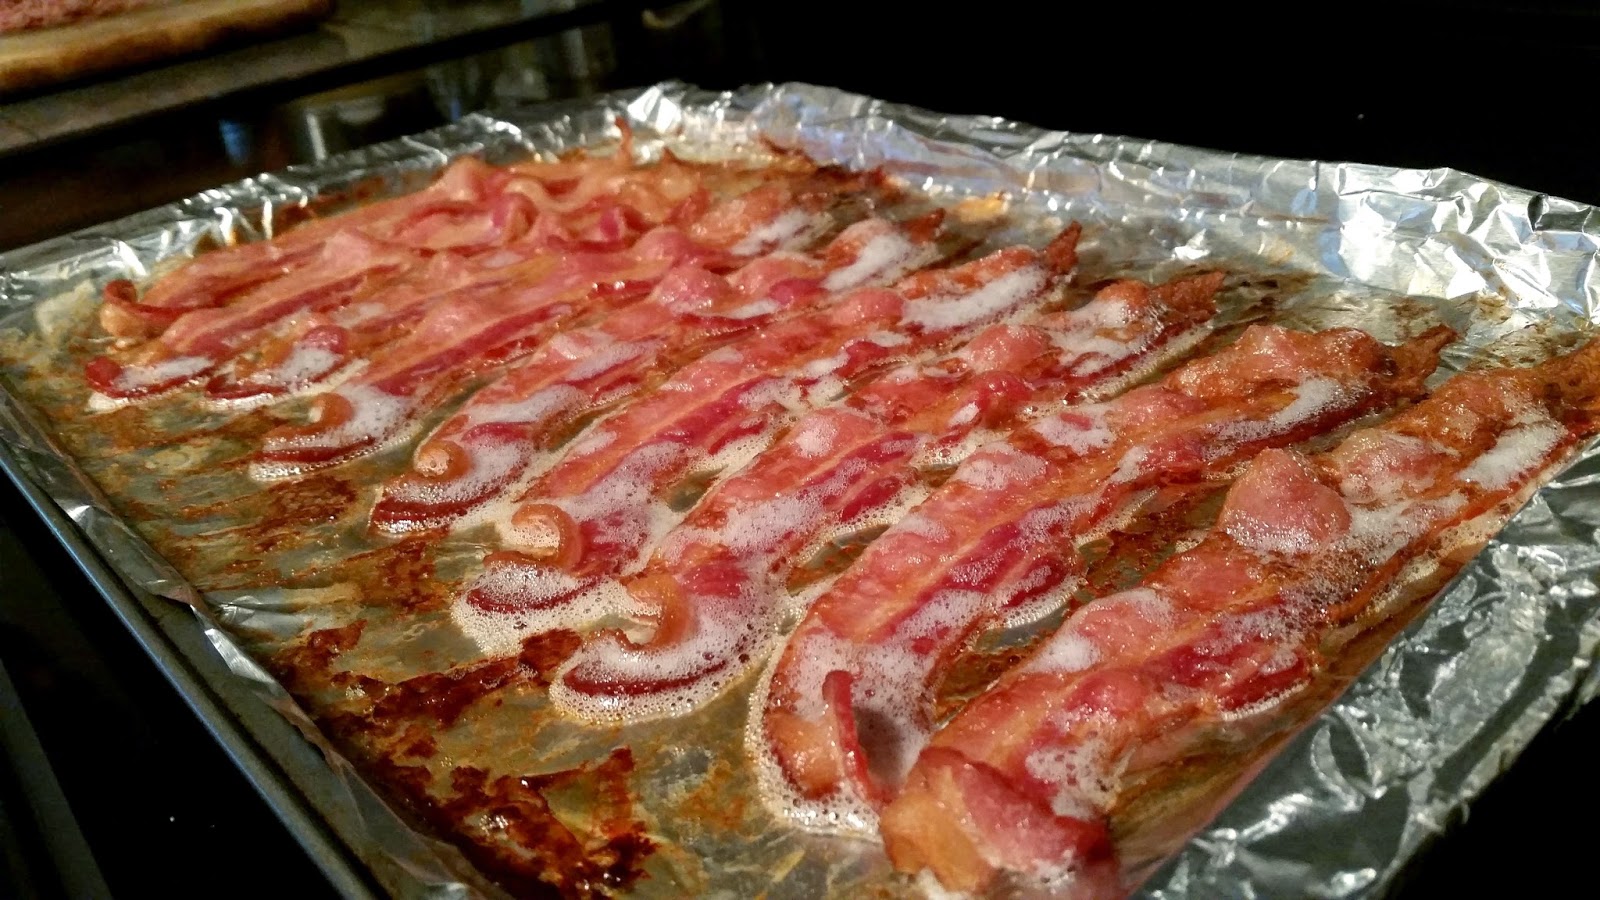 Easy way to cook bacon  #PackedWithSavings #shop